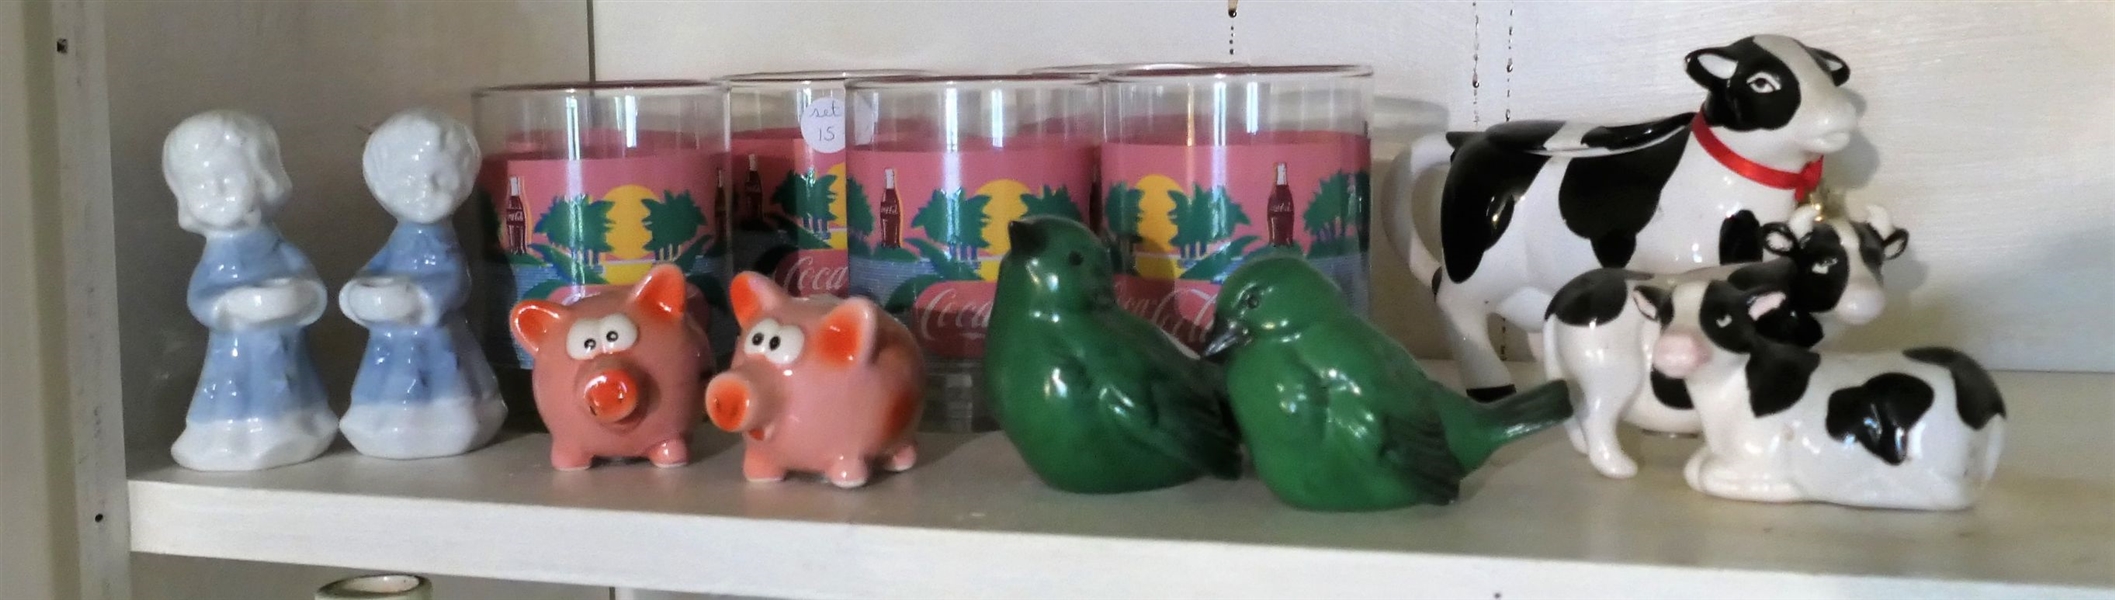 Set of Coca Cola Tumblers, Holden Beach Pig Shakers, Green Gobel Bird Figures, and Cow Shakers and Creamer